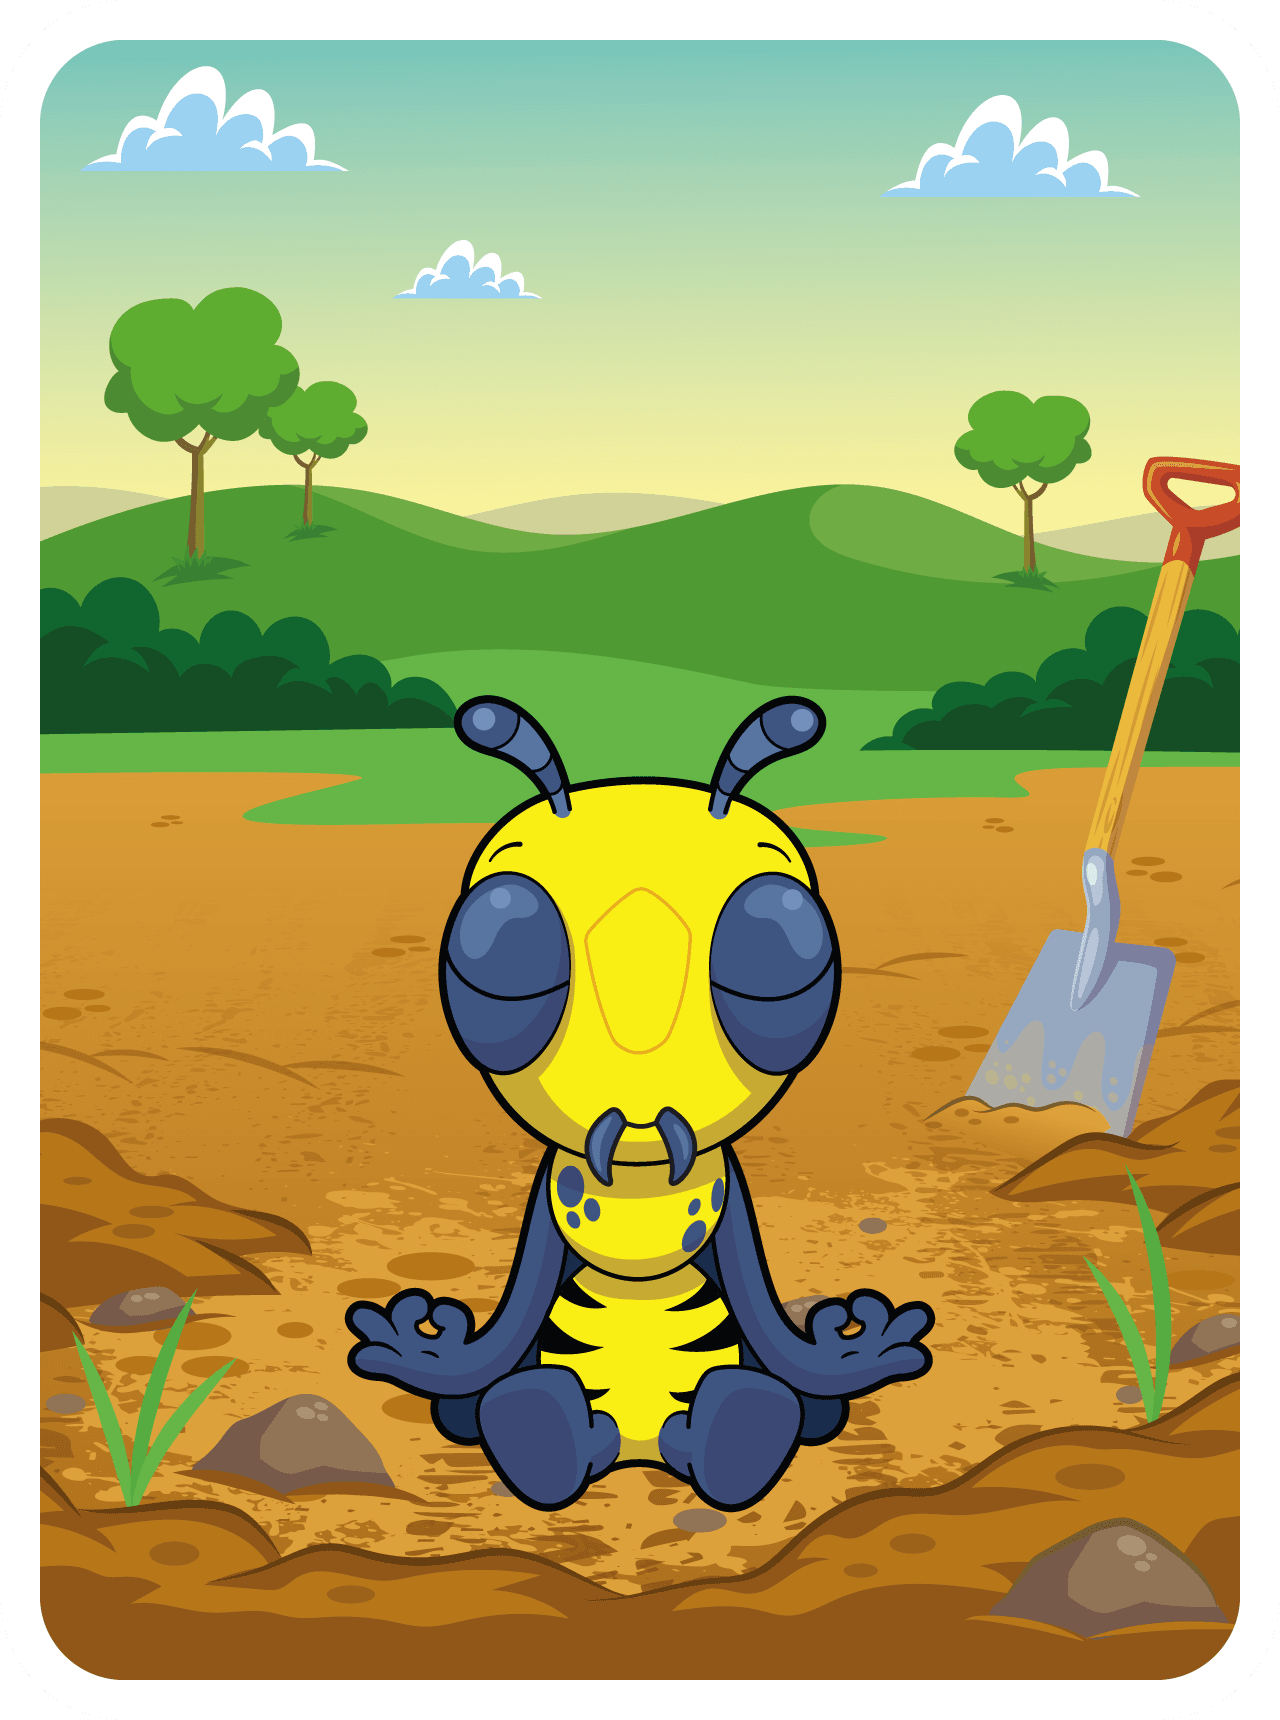 Wise Wasp #39980